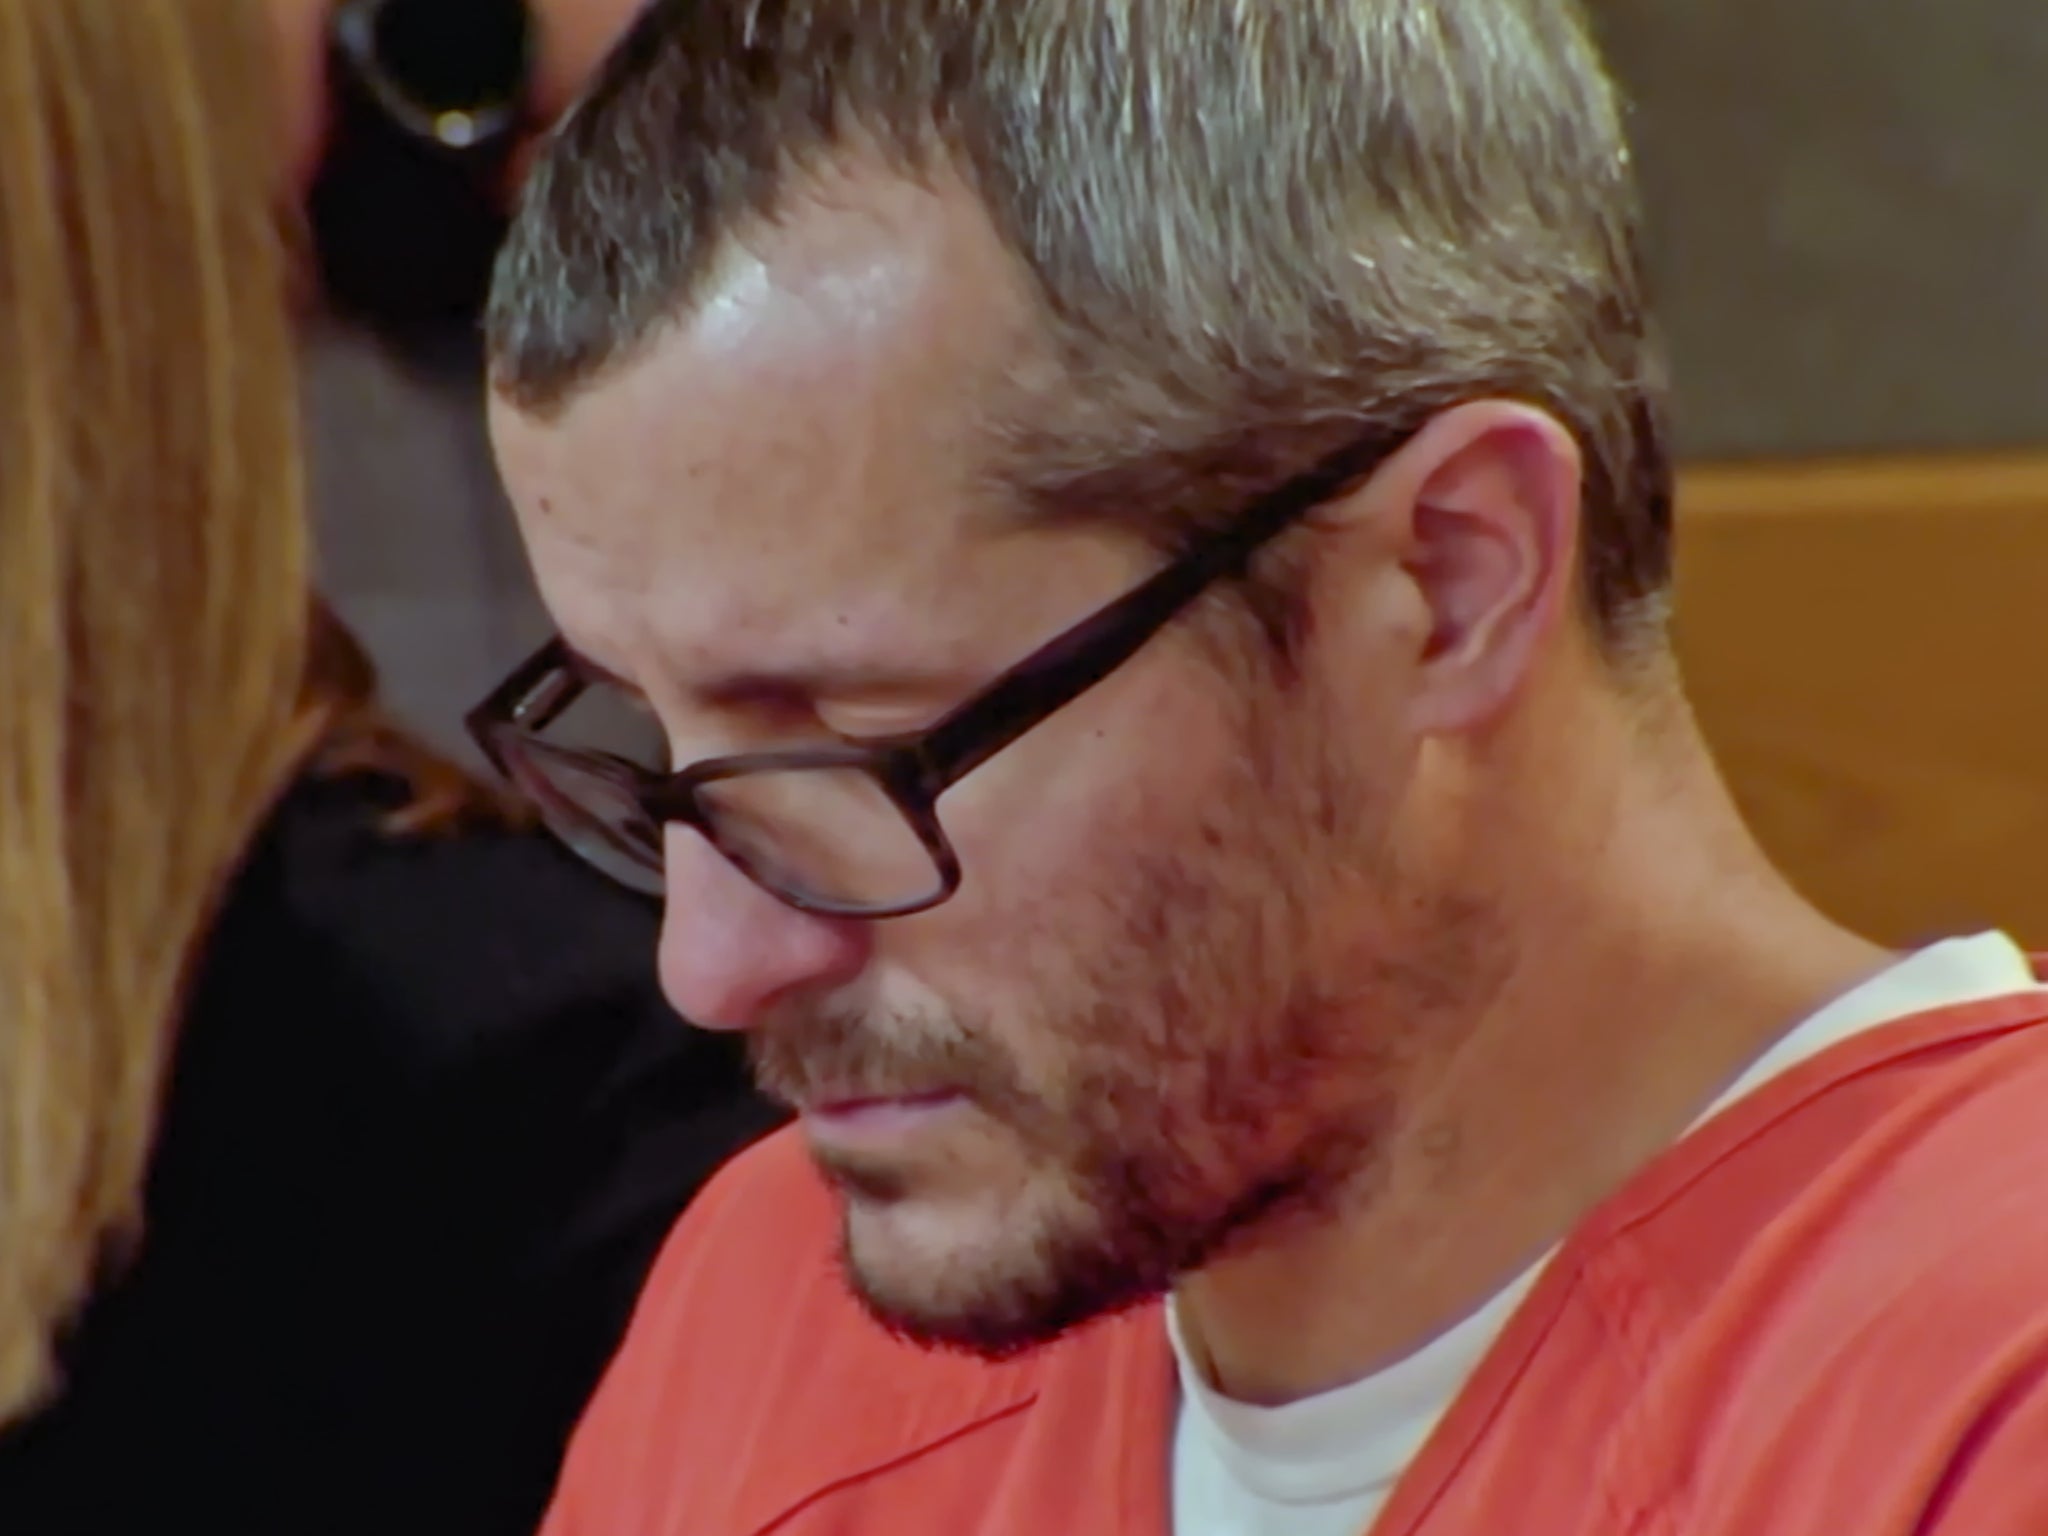 Chris Watts during his court hearing in 'American Murder: The Family Next Door’